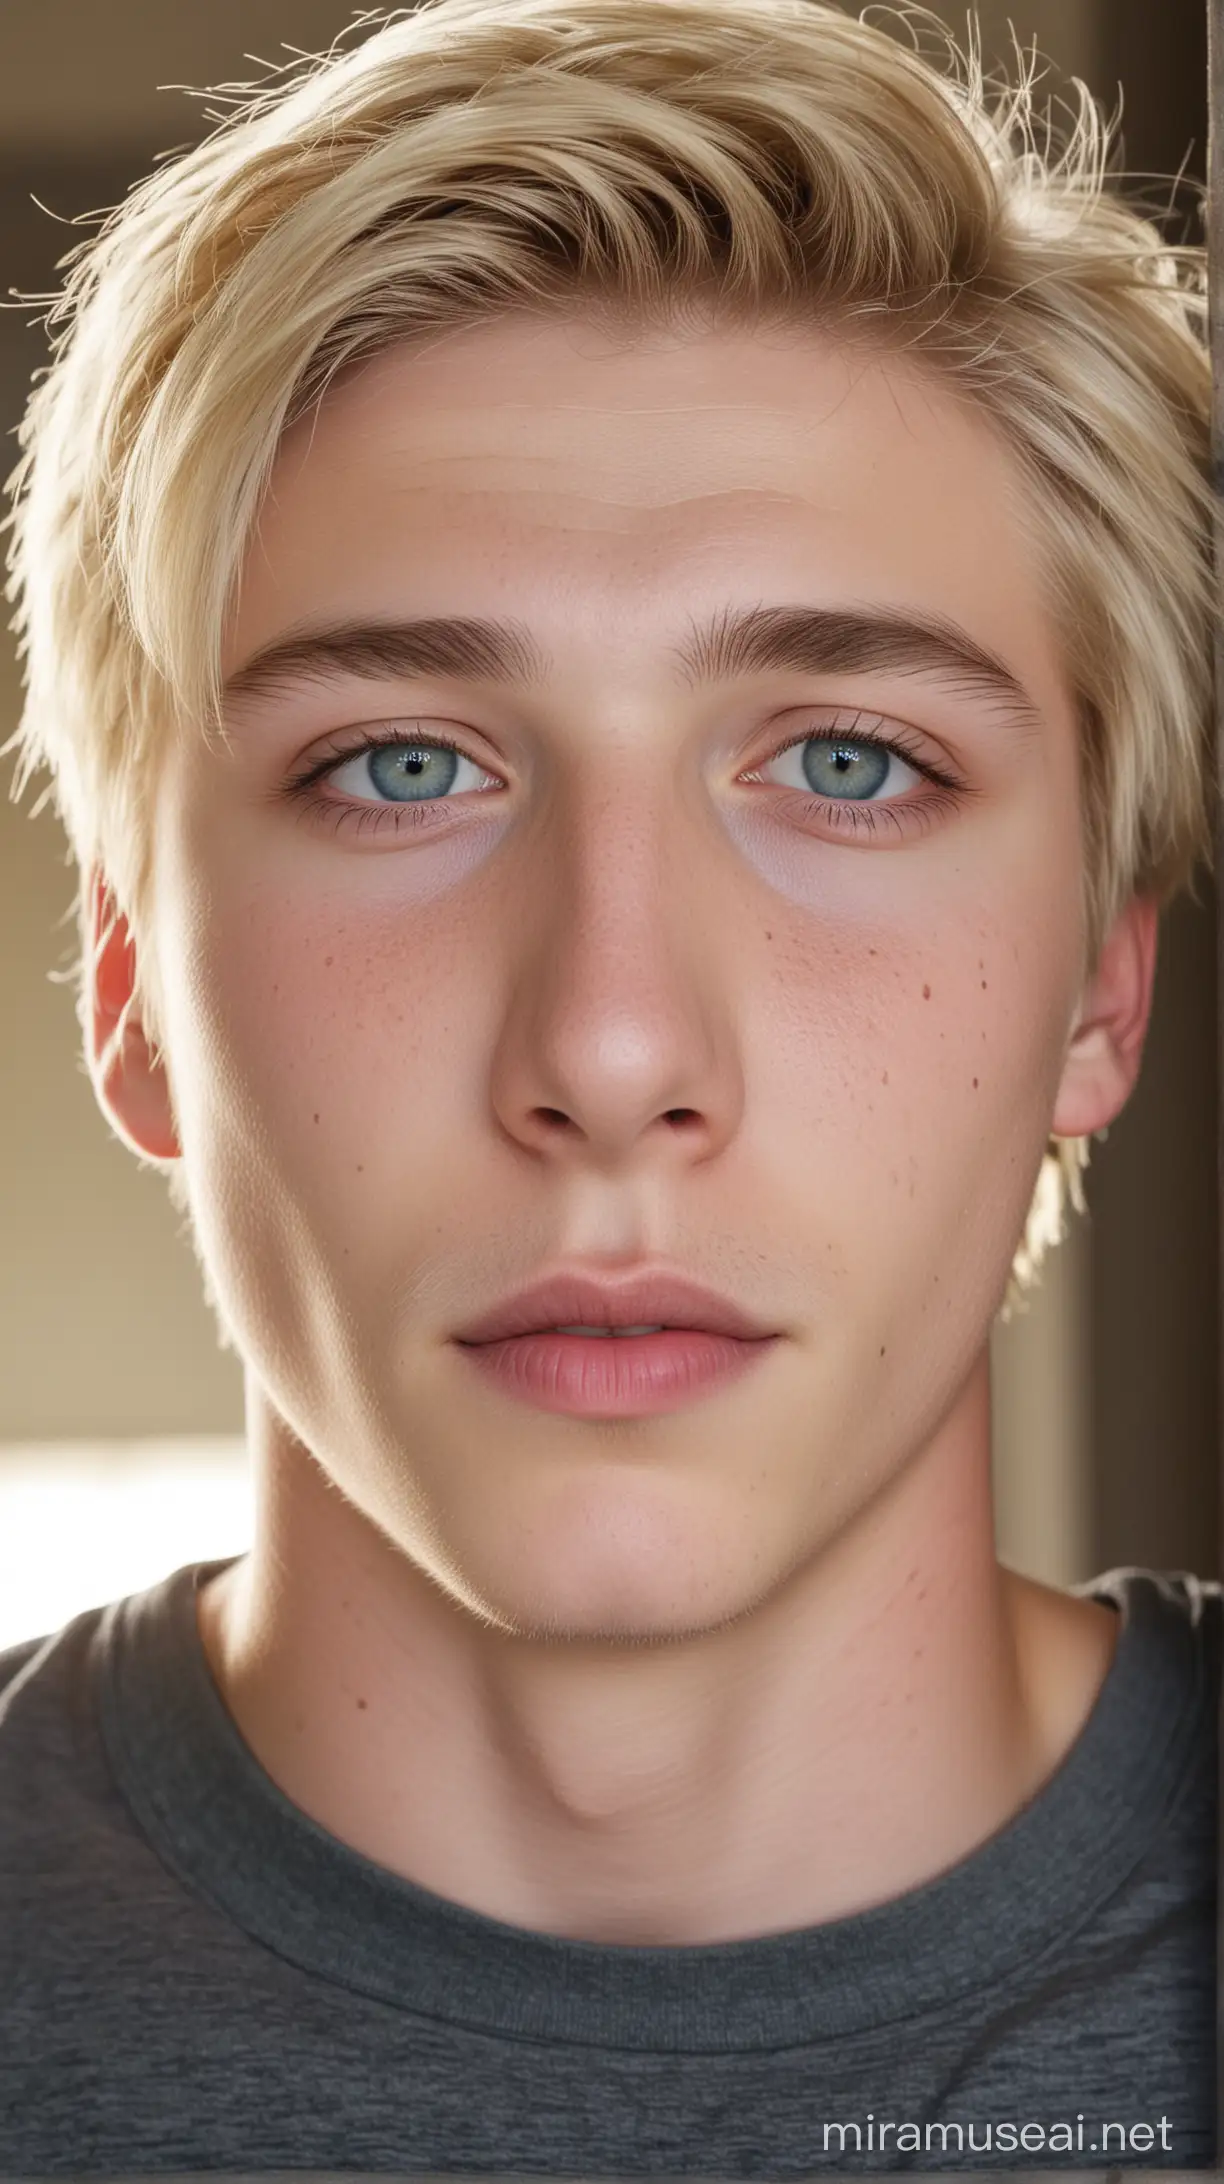 Young Man with Blonde Hair and Blue Eyes